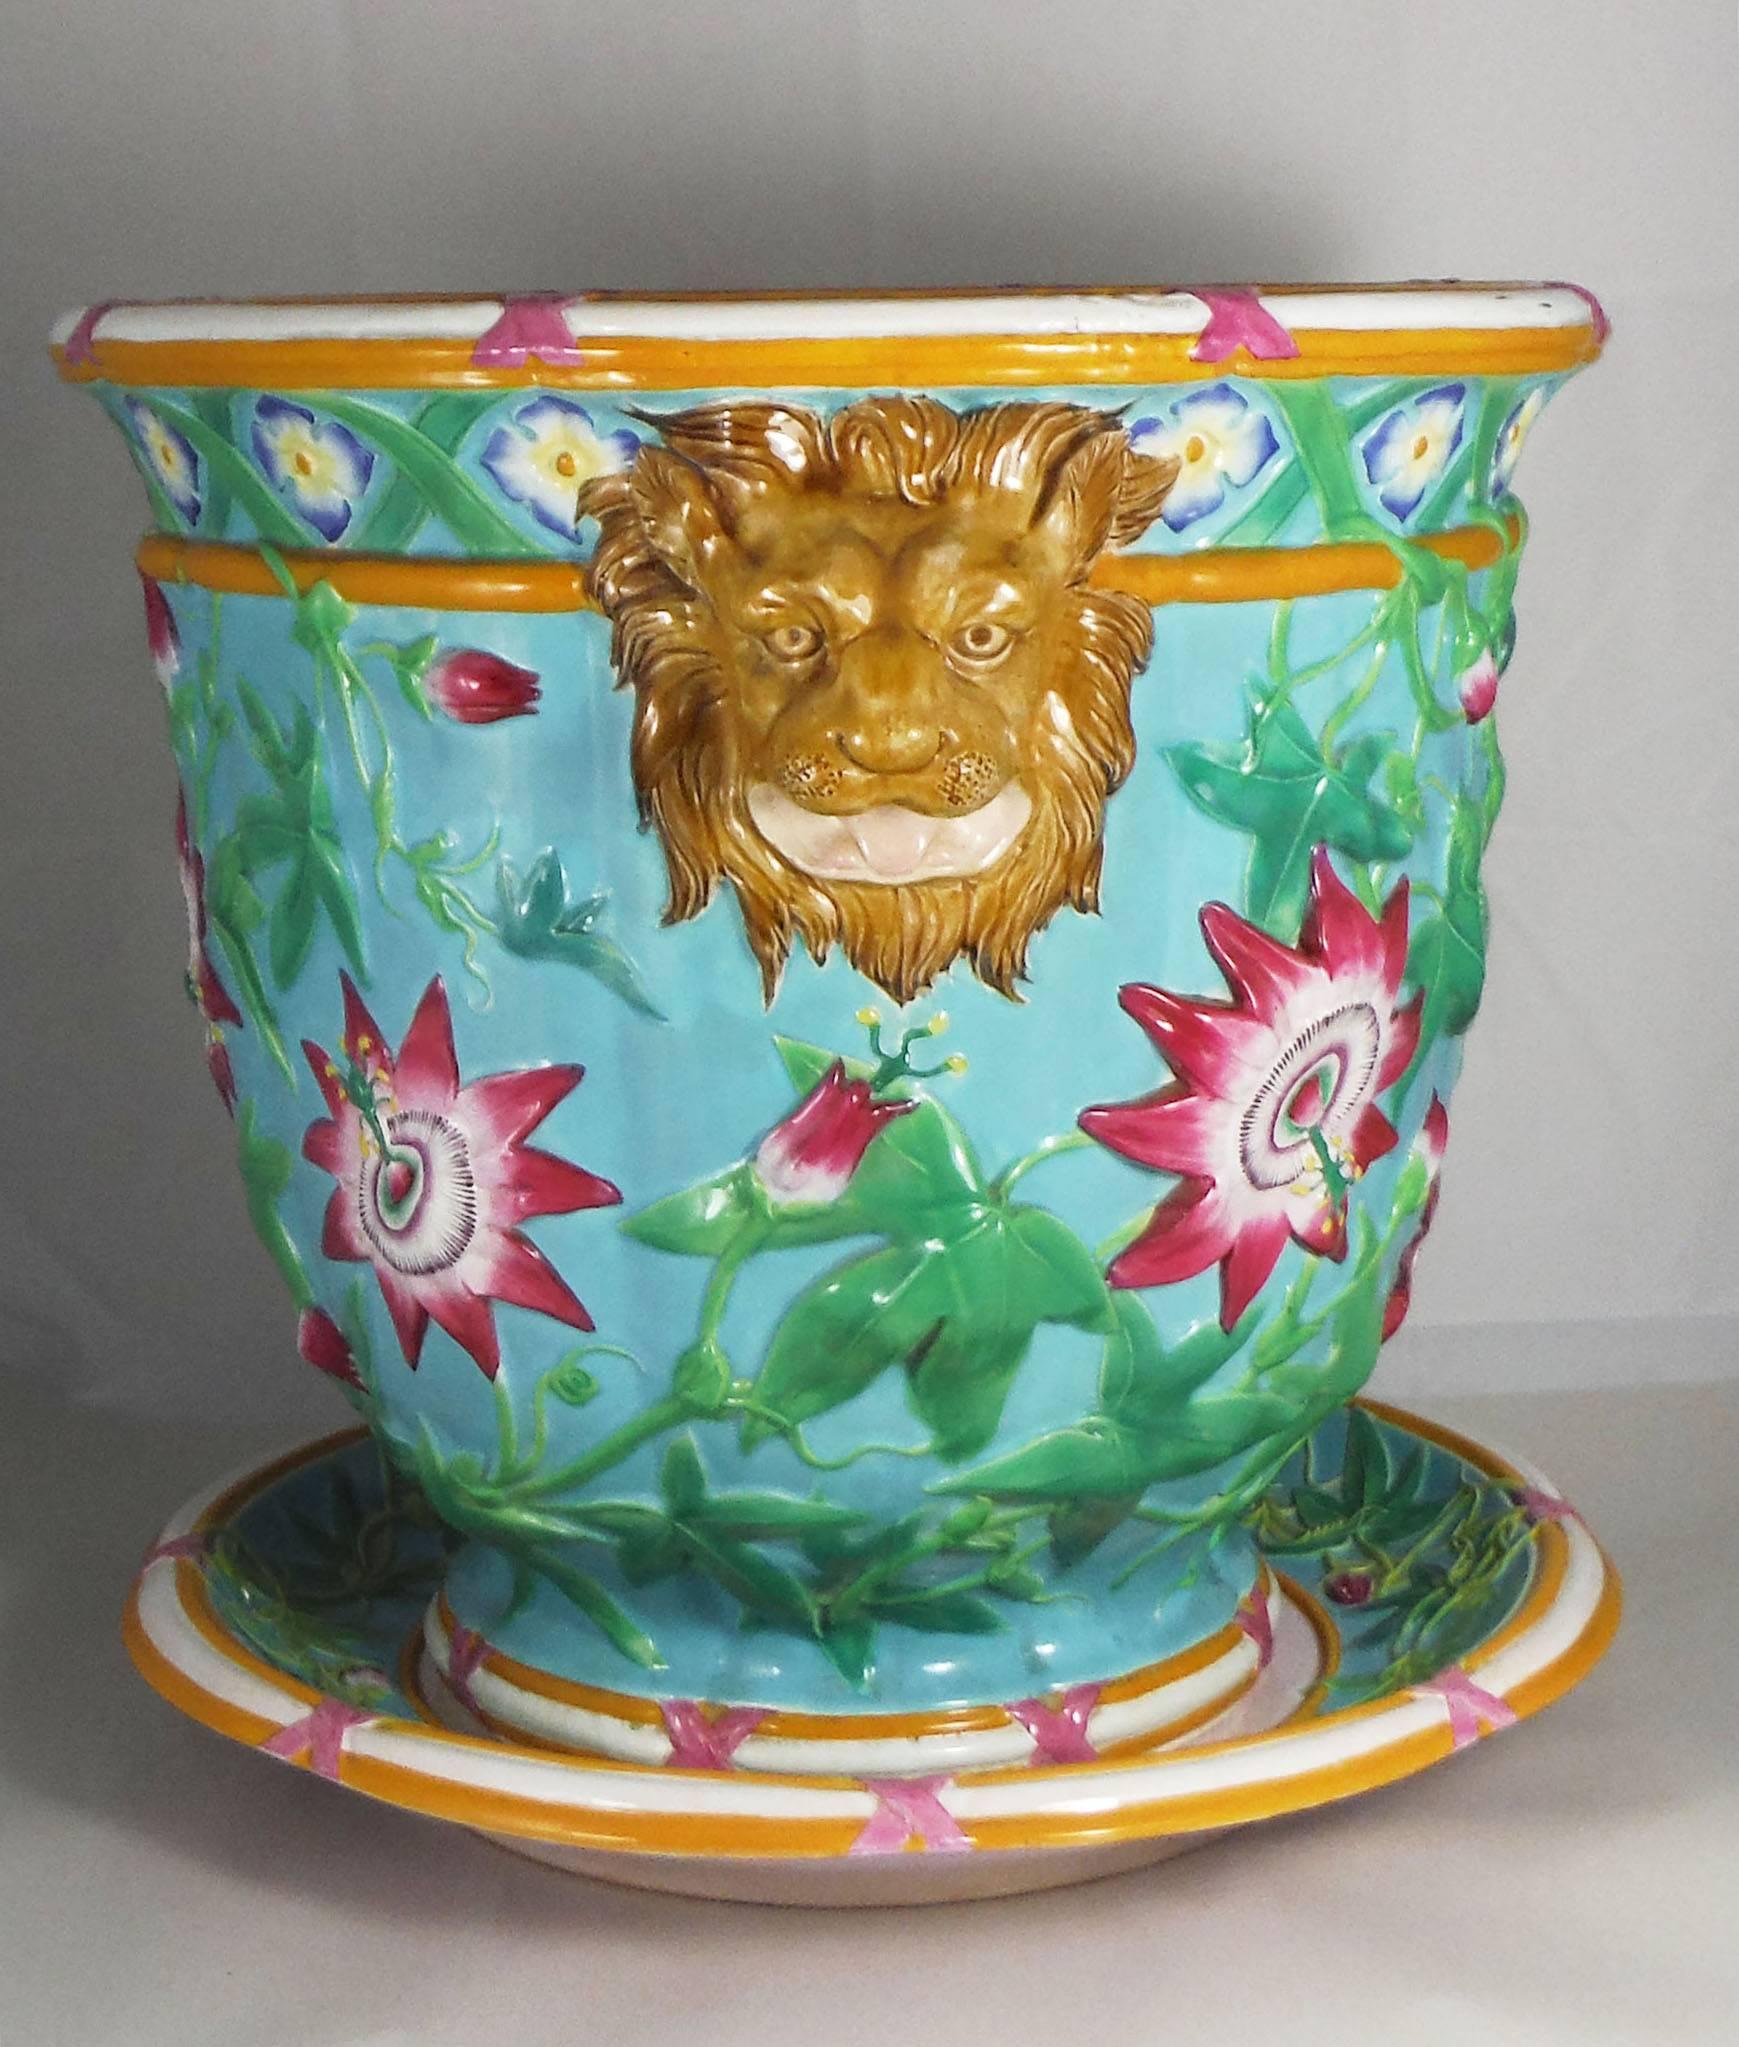 19th-Century monumental Victorian jardinière in the passion flower pattern on turquoise aqua background, with lion mask handles, moulded in high relief with trailing foliage, flowers and buds, beneath a trellis frieze with flowerhead centres, pink